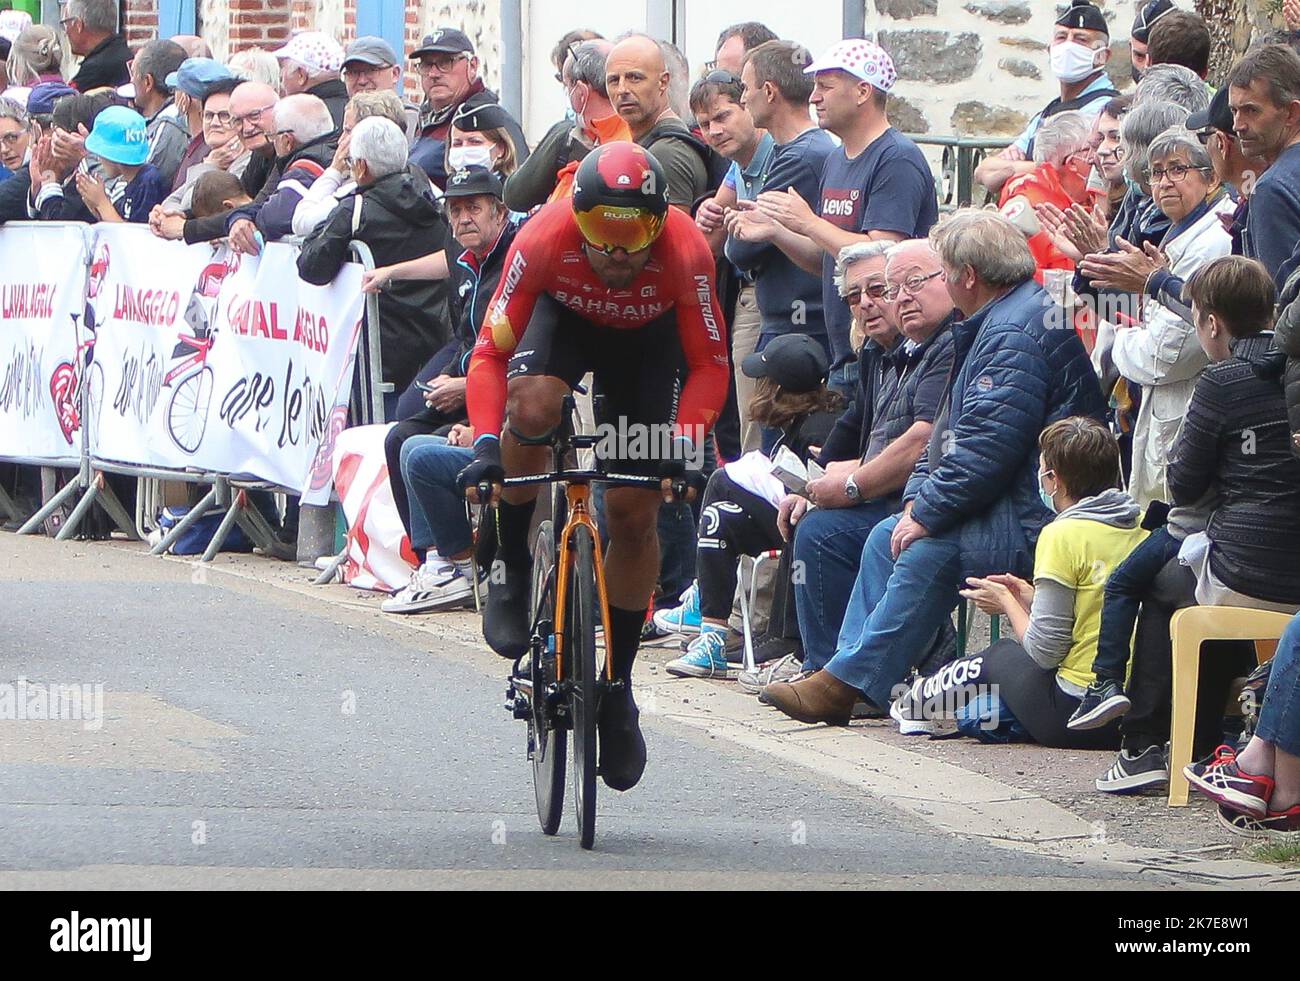 ©Laurent Lairys/MAXPPP - SONNY COLBRELLI of BAHRAIN VICTORIOUS during the Tour de France 2021, Cycling race stage 5, time trial, Change - Laval (27,2 Km) on June 30, 2021 in Laval, France - Photo Laurent Lairys / MAXPPP - 2021 Tour de France stage 5 time trial June 30 2021  Stock Photo